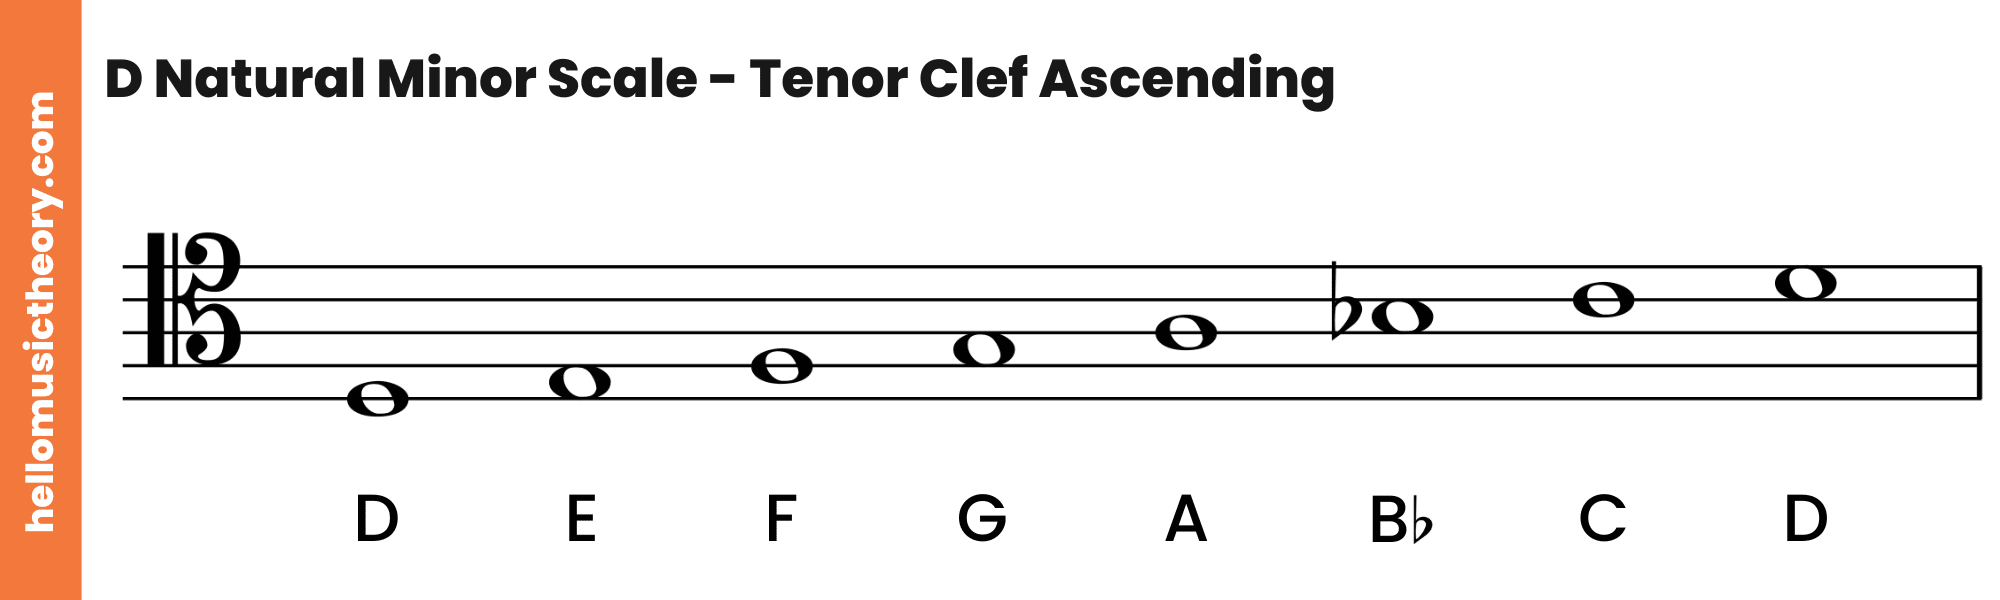 D Natural Minor Scale Tenor Clef Ascending